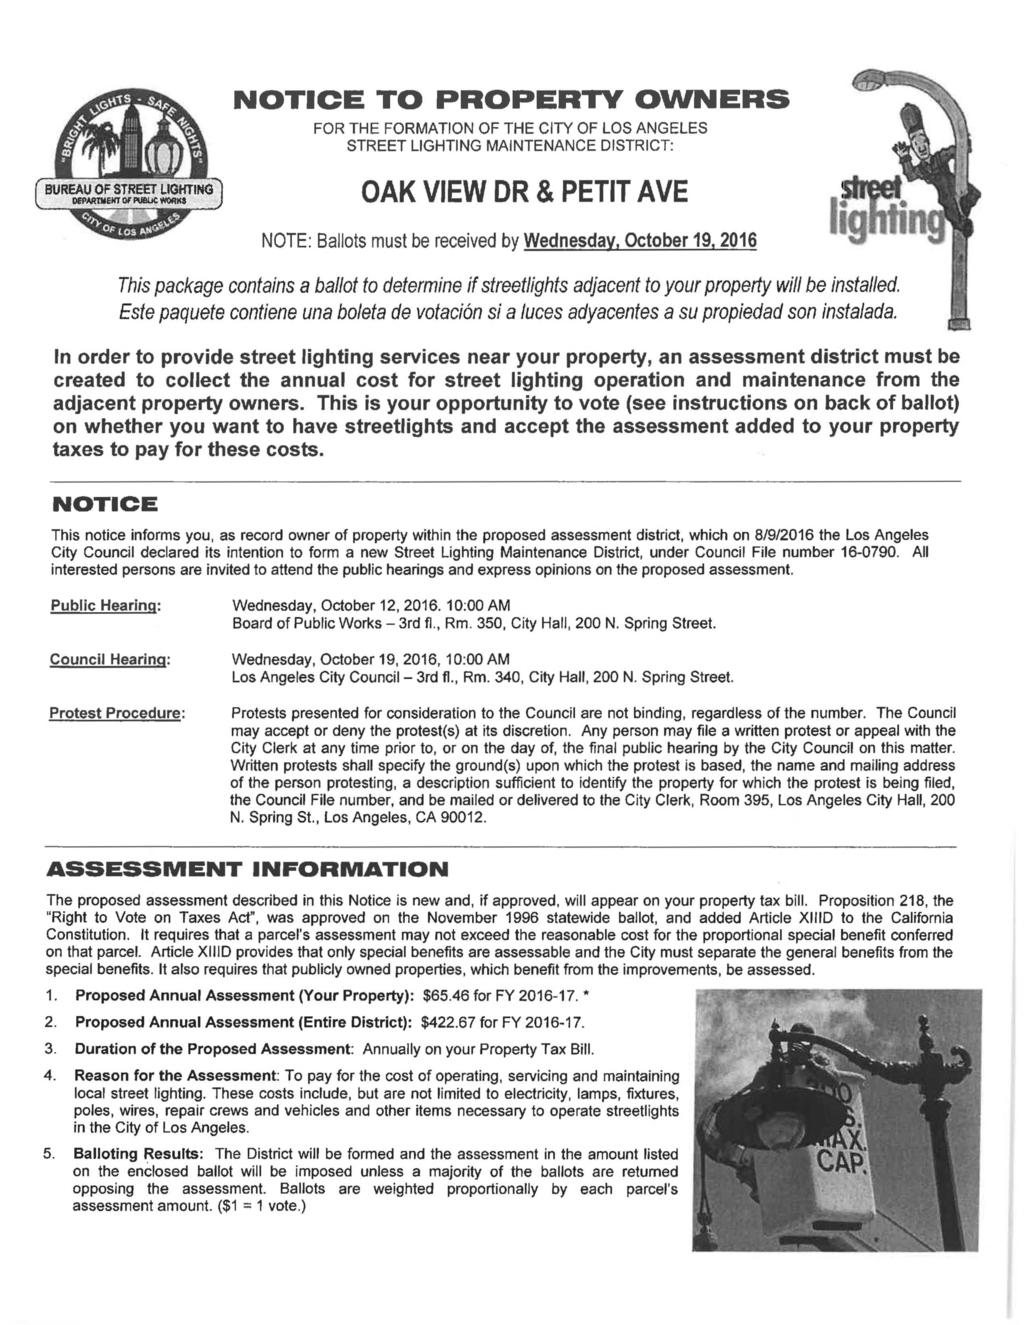 BUREAU OF STREET LIGHTING WSWfTMEtfT Of WBUC WOflKS NOTICE TO PROPERTY OWNERS FOR THE FORMATION OF THE CITY OF LOS ANGELES STREET LIGHTING MAINTENANCE DISTRICT: OAK VIEW DR & PETIT AVE NOTE: Ballots